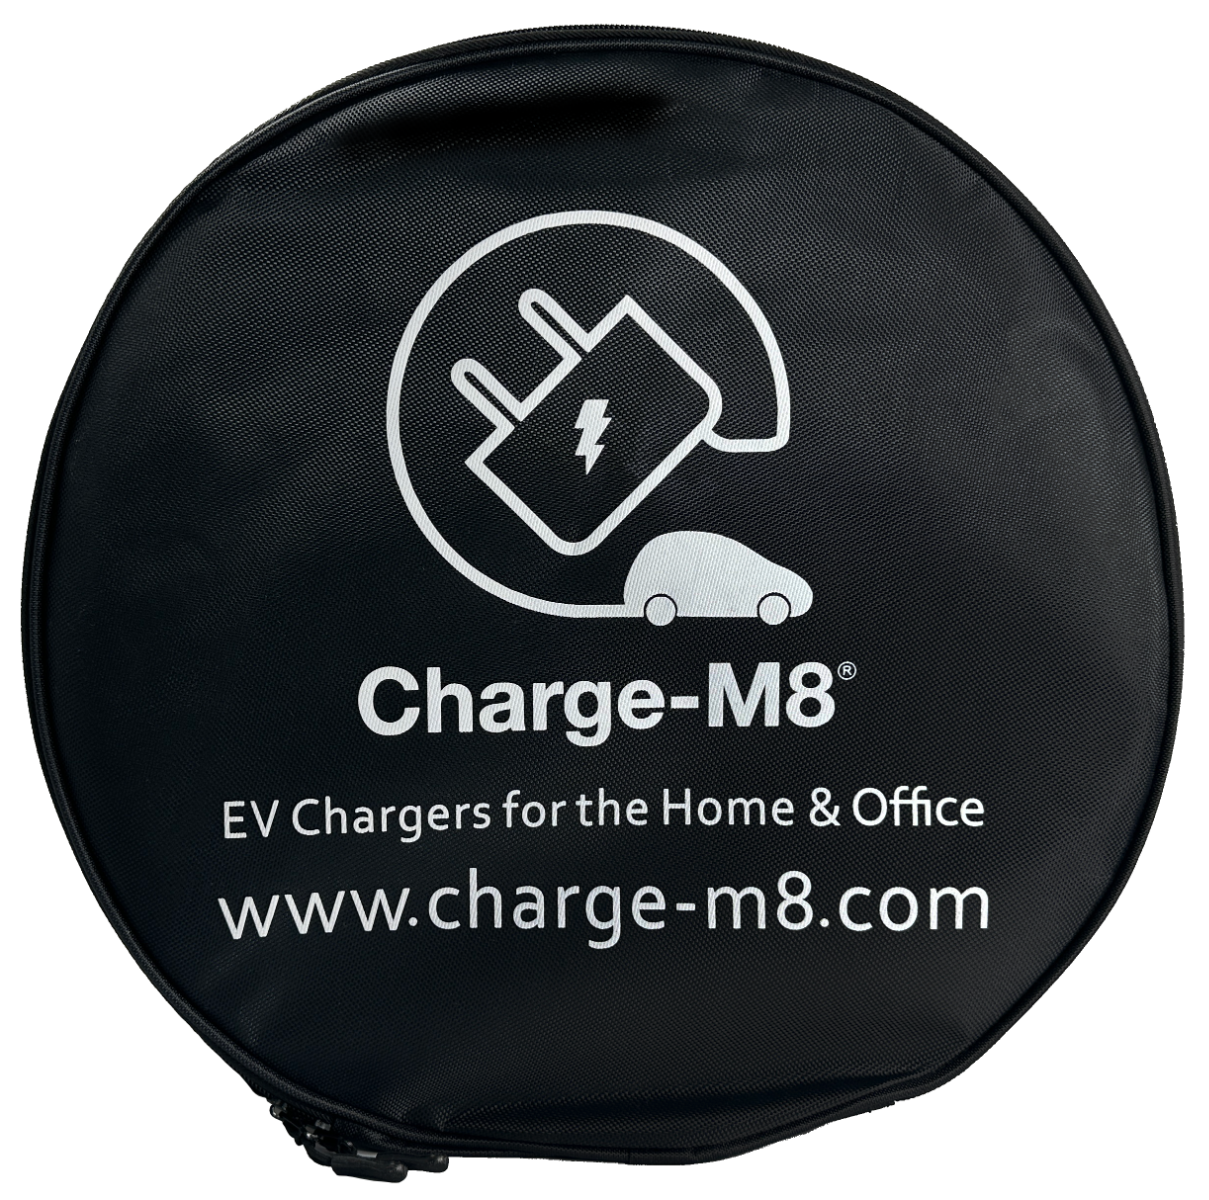 Charge-M8 Cable Bag